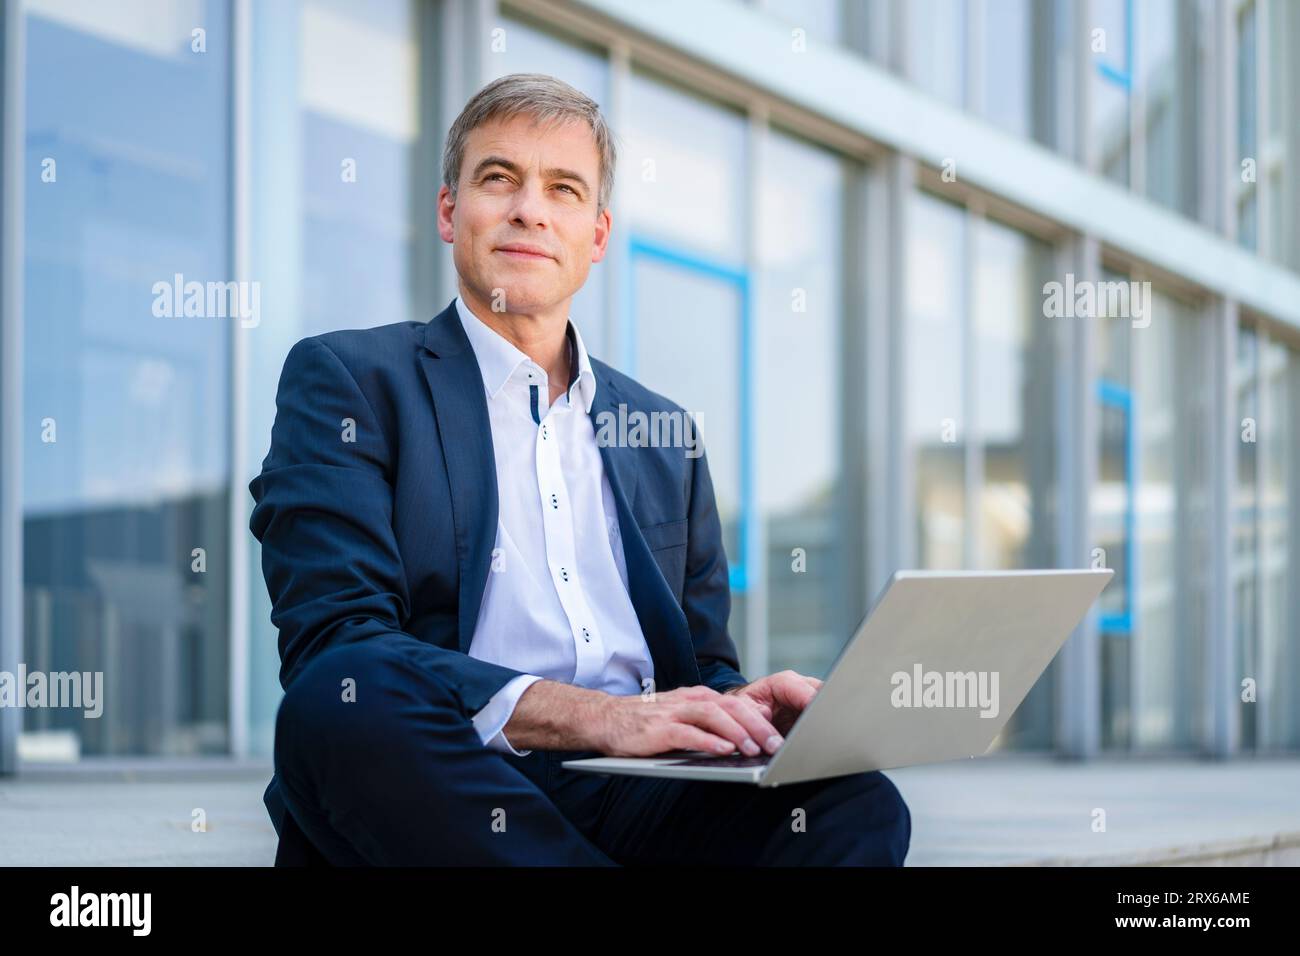 Businessman working on laptop sitting in front of office building Stock Photo